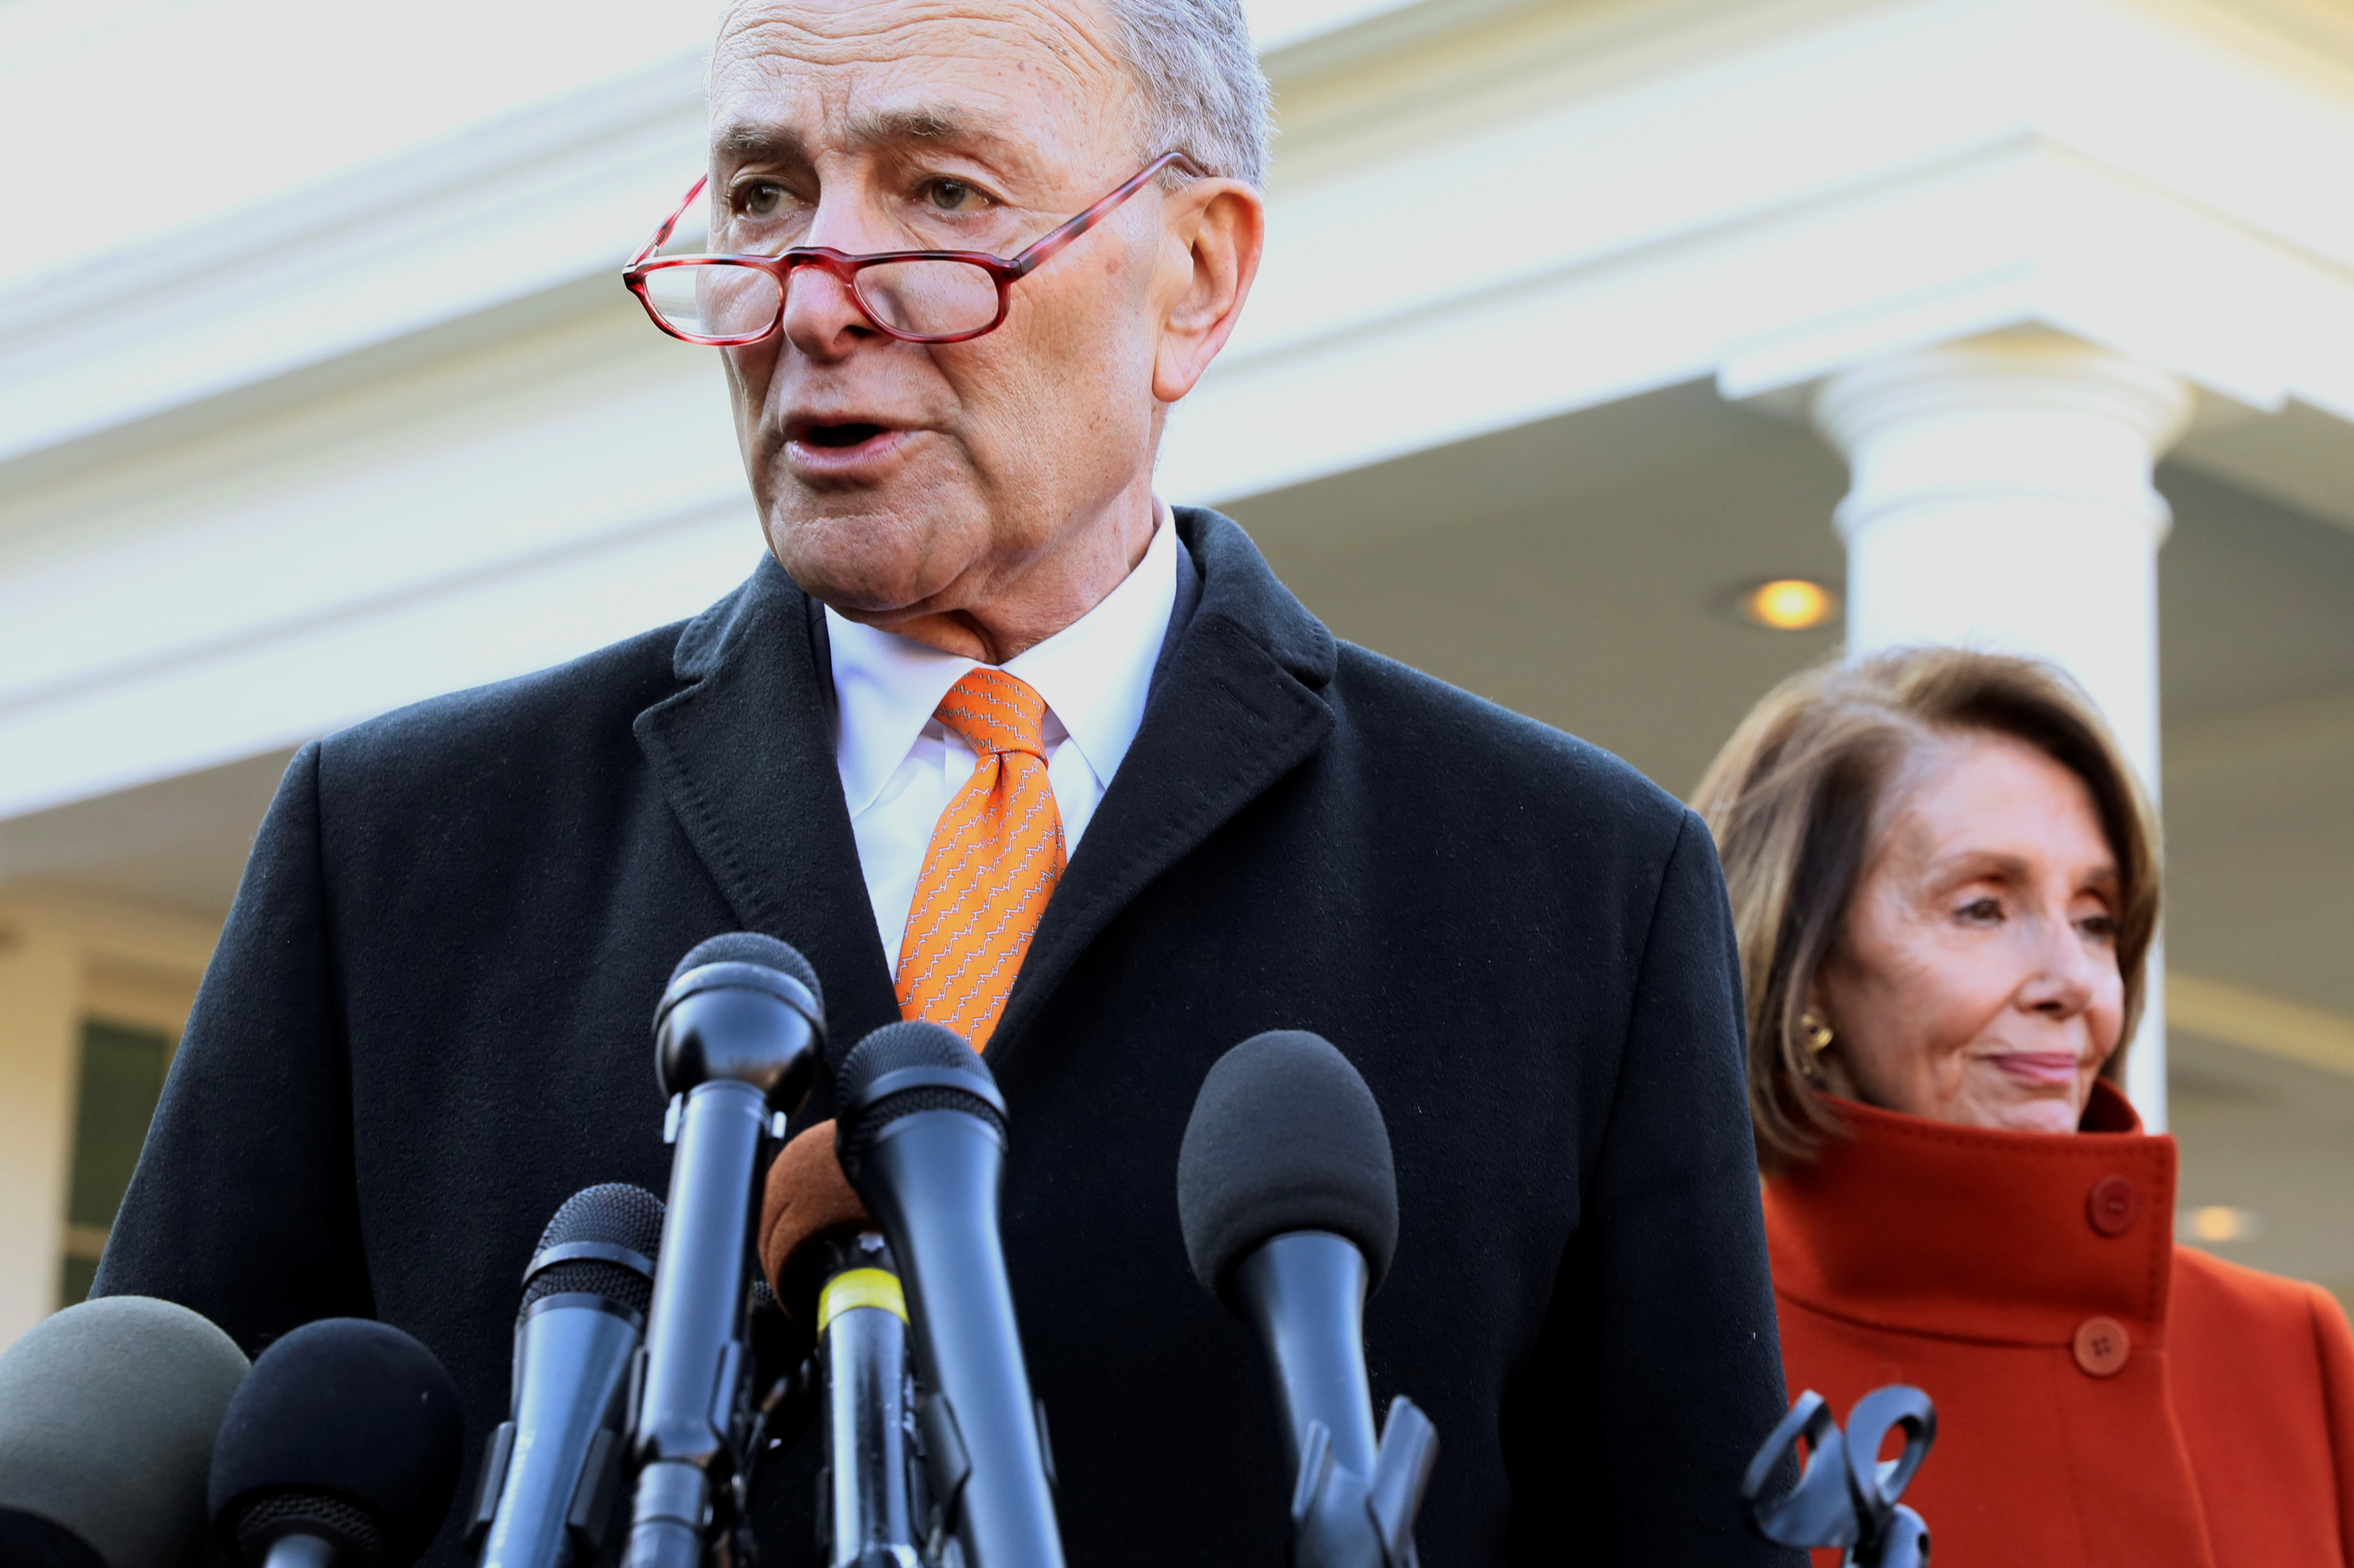 U.S. Senate Minority Leader Schumer and House Speaker designate Pelosi speak to reporters after meeting with President Trump at the White House in Washington